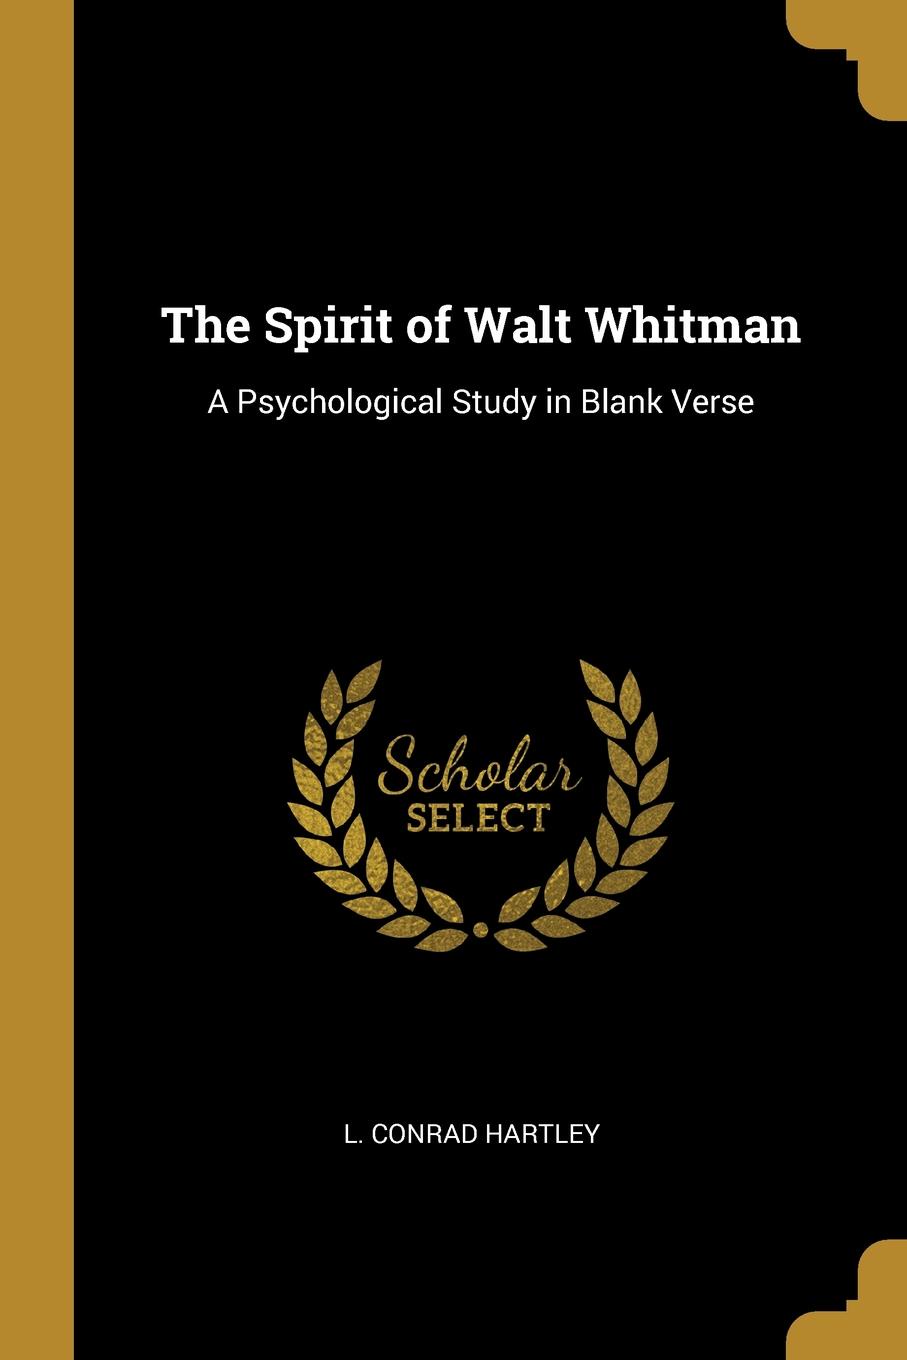 The Spirit of Walt Whitman. A Psychological Study in Blank Verse